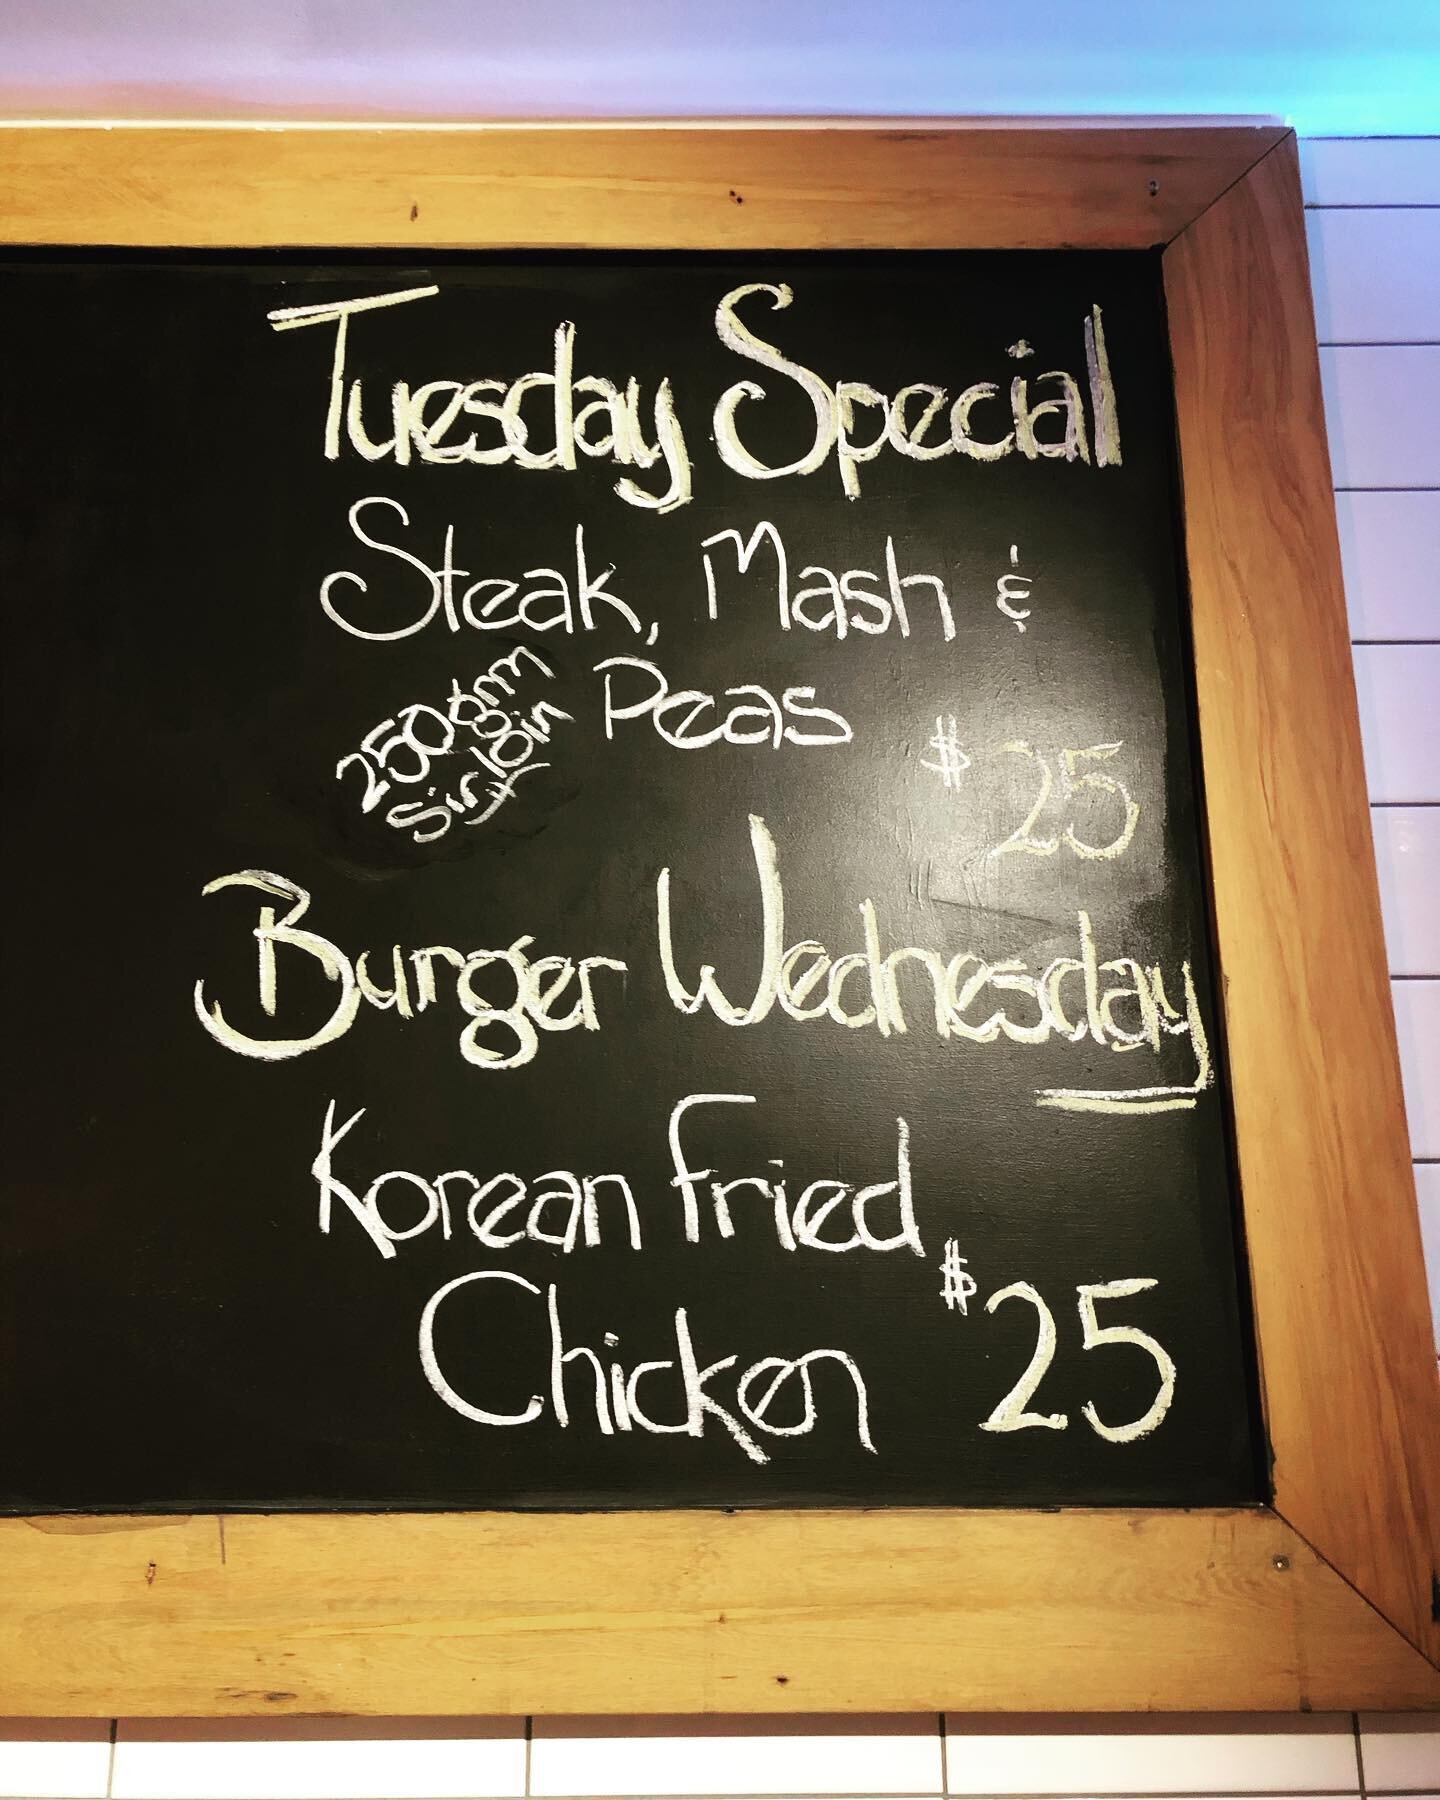 How good was last nights dinner special? If you missed it, be sure to catch tonight&rsquo;s special - Korean Fried Chicken burger 🍔 
.
.
#specials #burger #chicken #parkkitchen #wellyeats